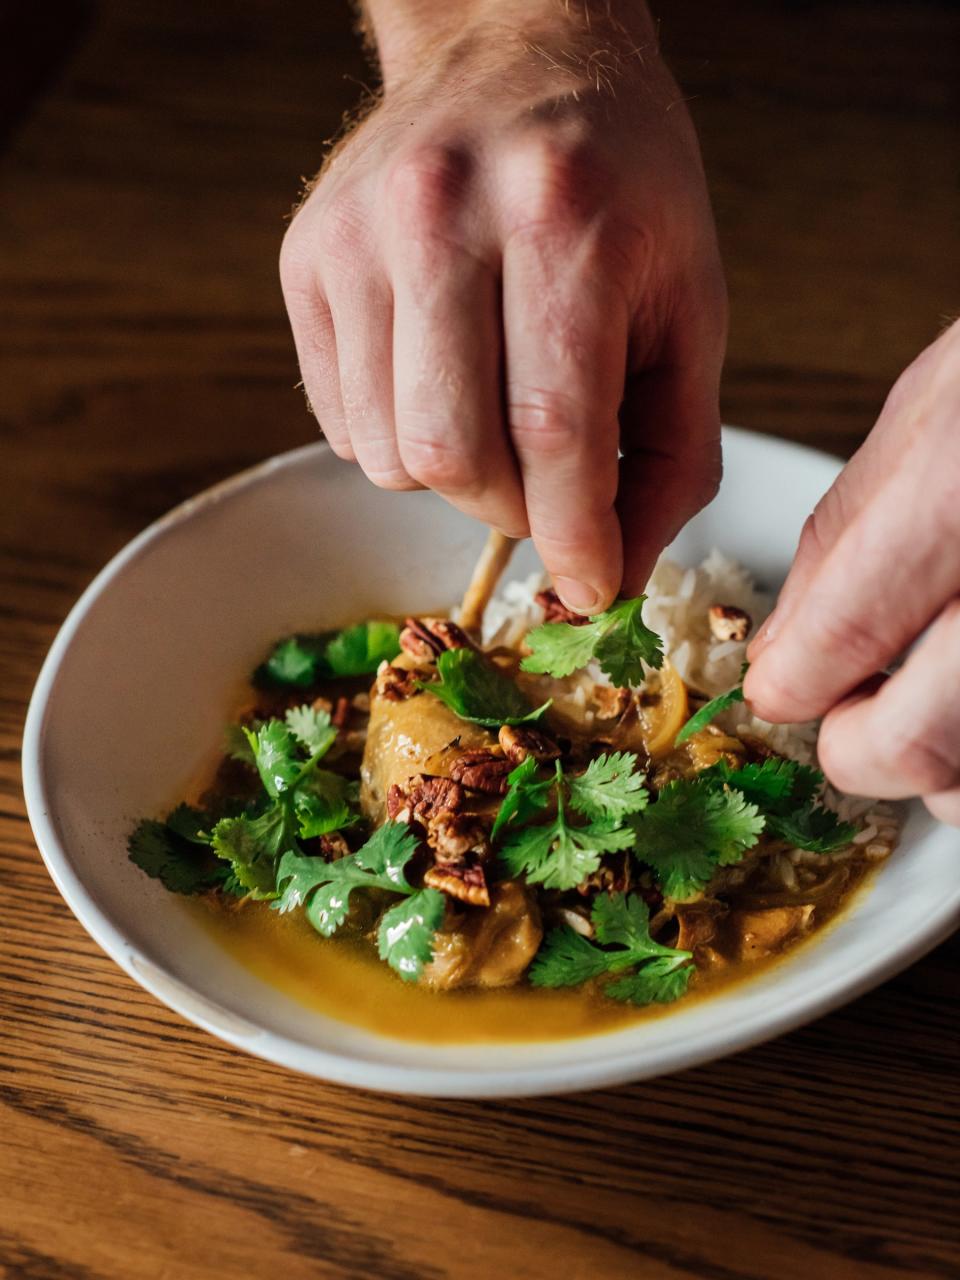 Brett Martin, <em>GQ</em>'s chief food critic and NOLA resident, went in search of the nation's best new restaurants. Then he came back home only to find that, in the meantime, his favorite city had spawned some his favorite new places to eat.